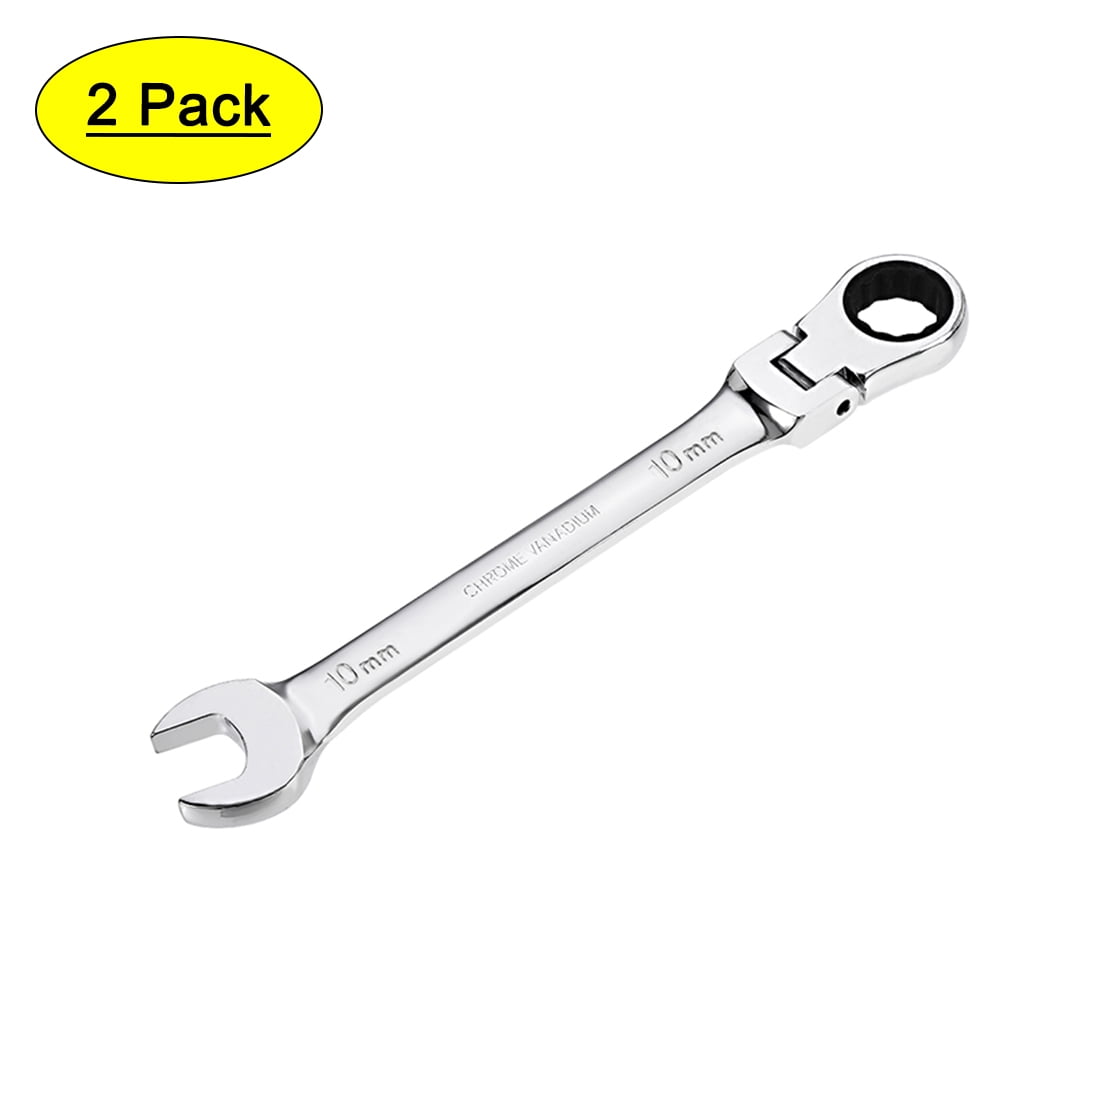 Gunpla 8 Pieces 8-17mm Flexible Head Combination Ratcheting Wrench Spanner Set Metric and SAE